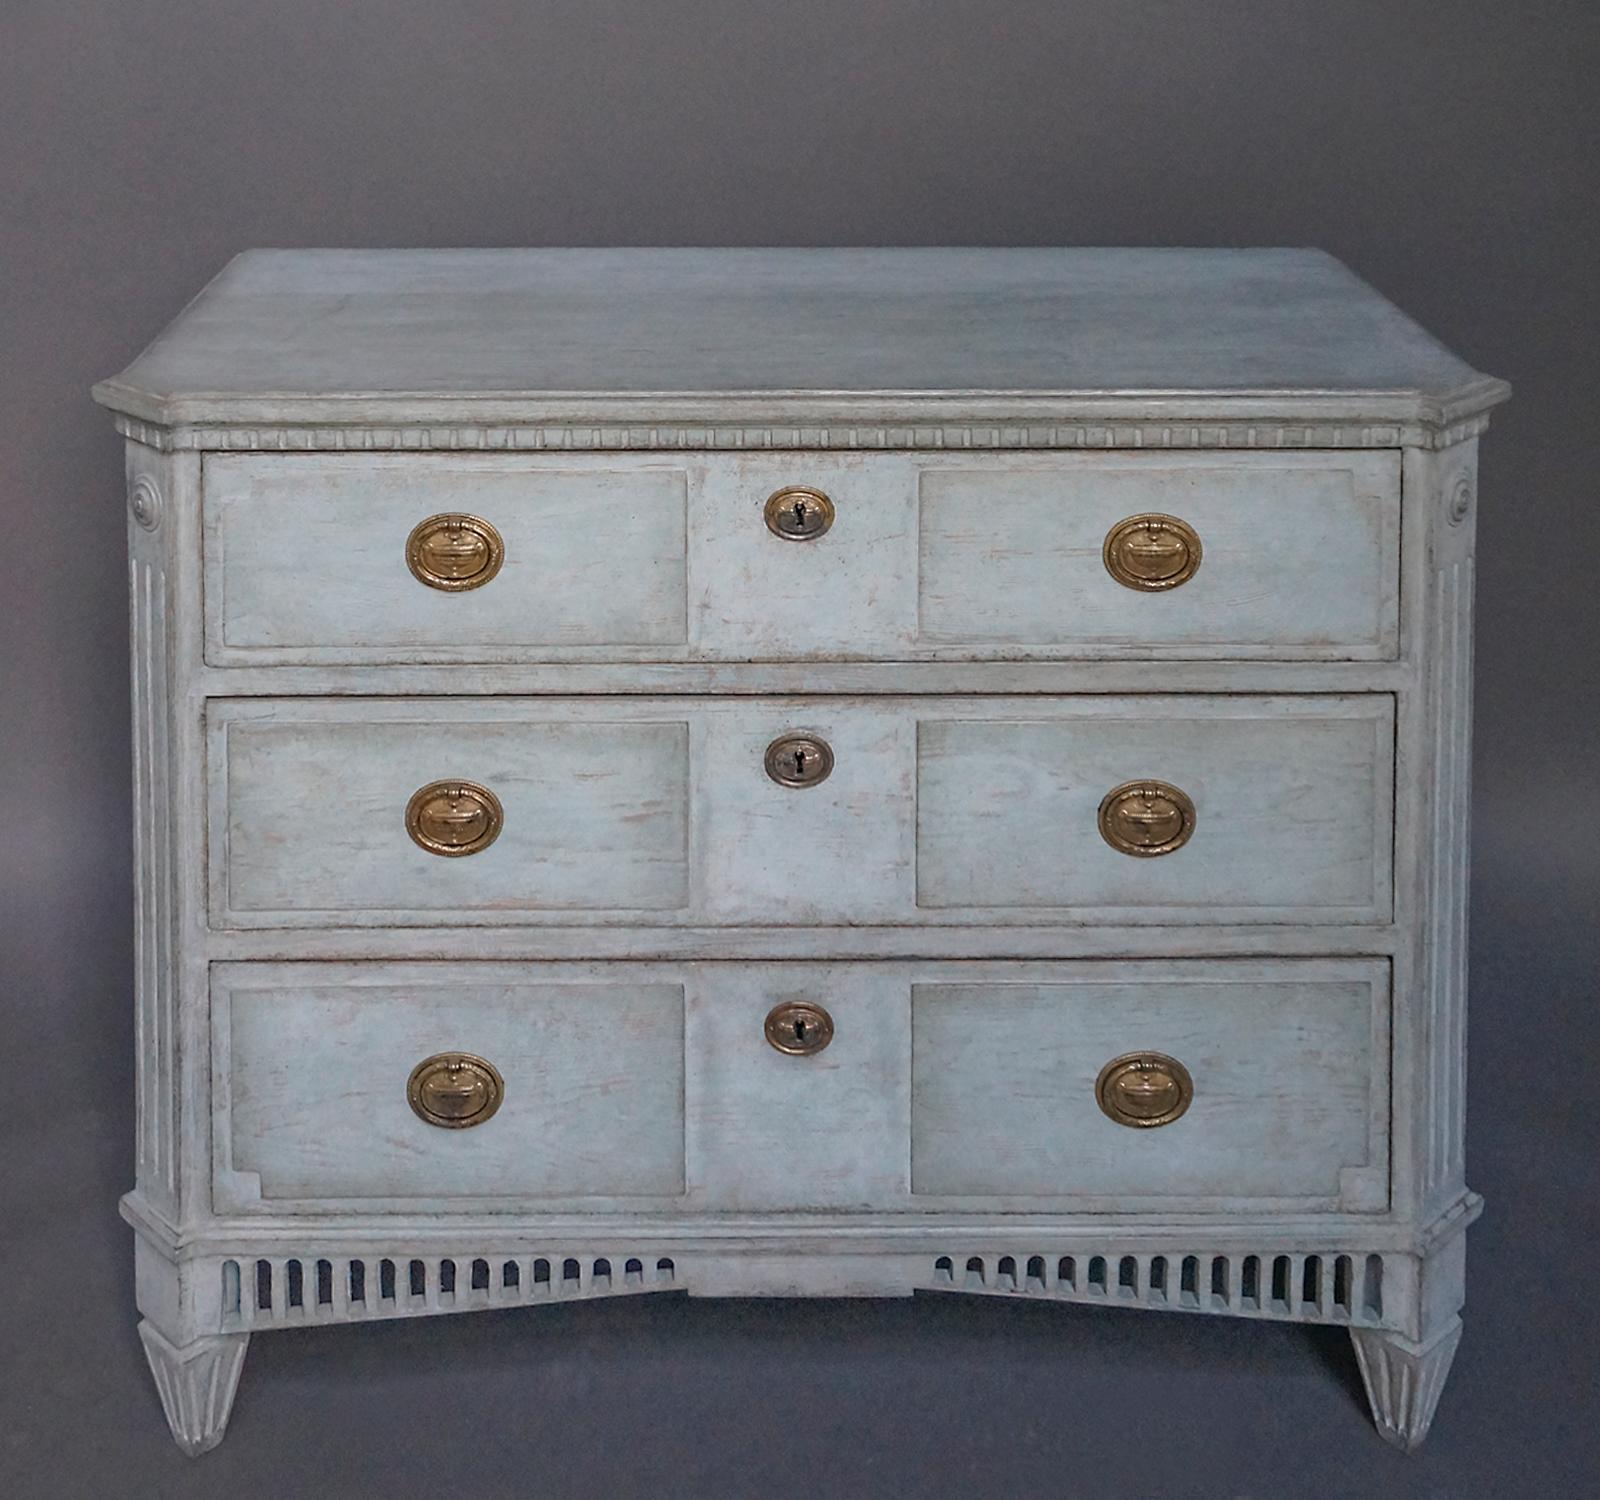 Period neoclassical chest of drawers, Sweden, circa 1820, with shaped top and canted corners. The drawer fronts have raised panels with period drawer pulls and locks. Below the drawers is a curved and pierced stretcher which adds elegance to the